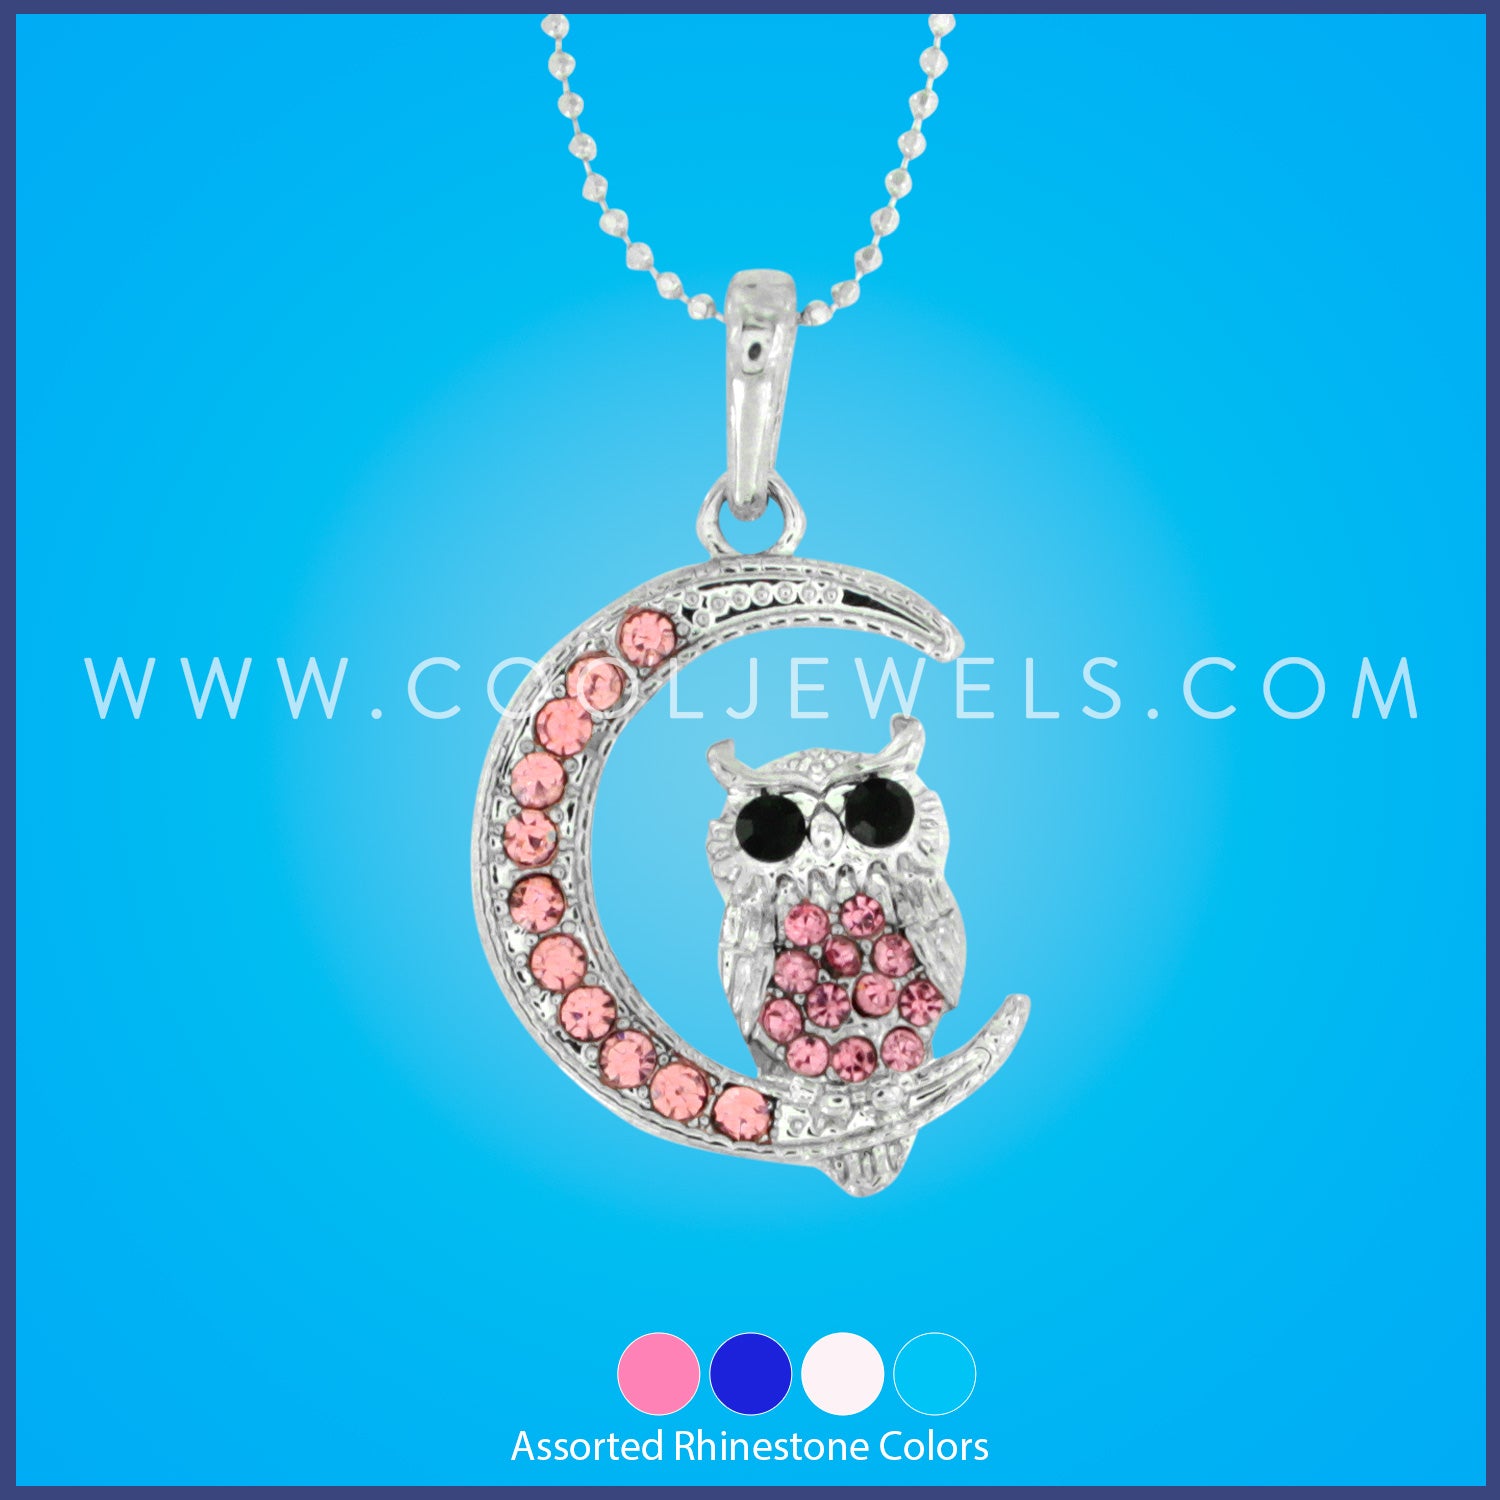 SILVER BALL CHAIN NECKLACE WITH RHINESTONE MOON & OWL - ASSORTED